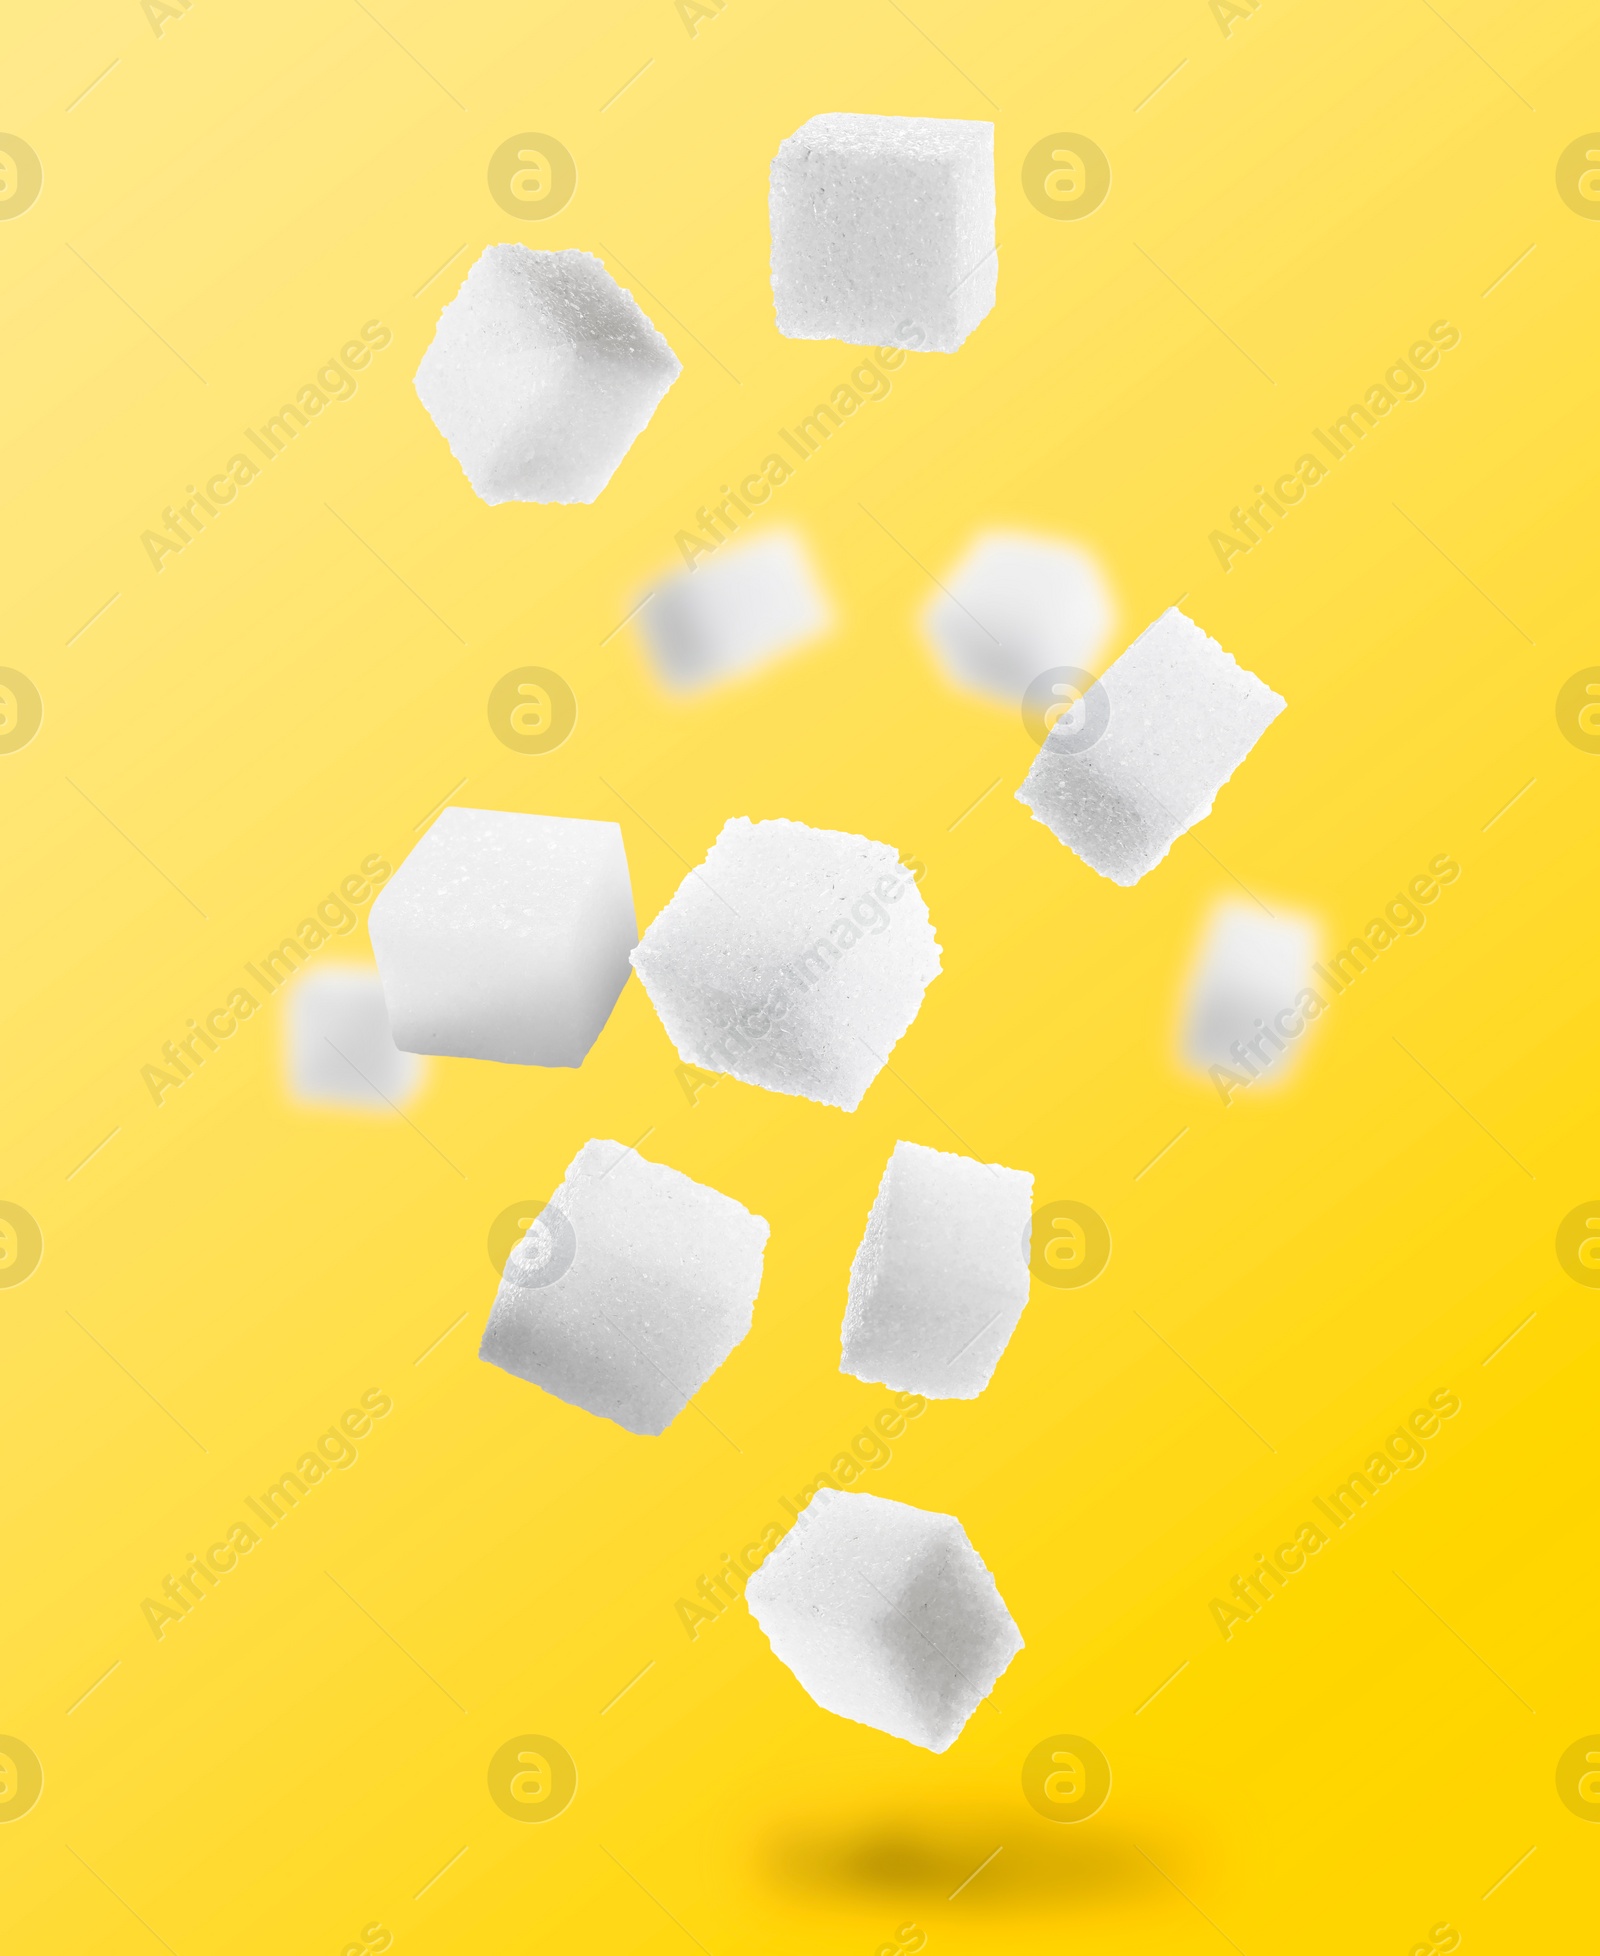 Image of Refined sugar cubes in air on yellow background